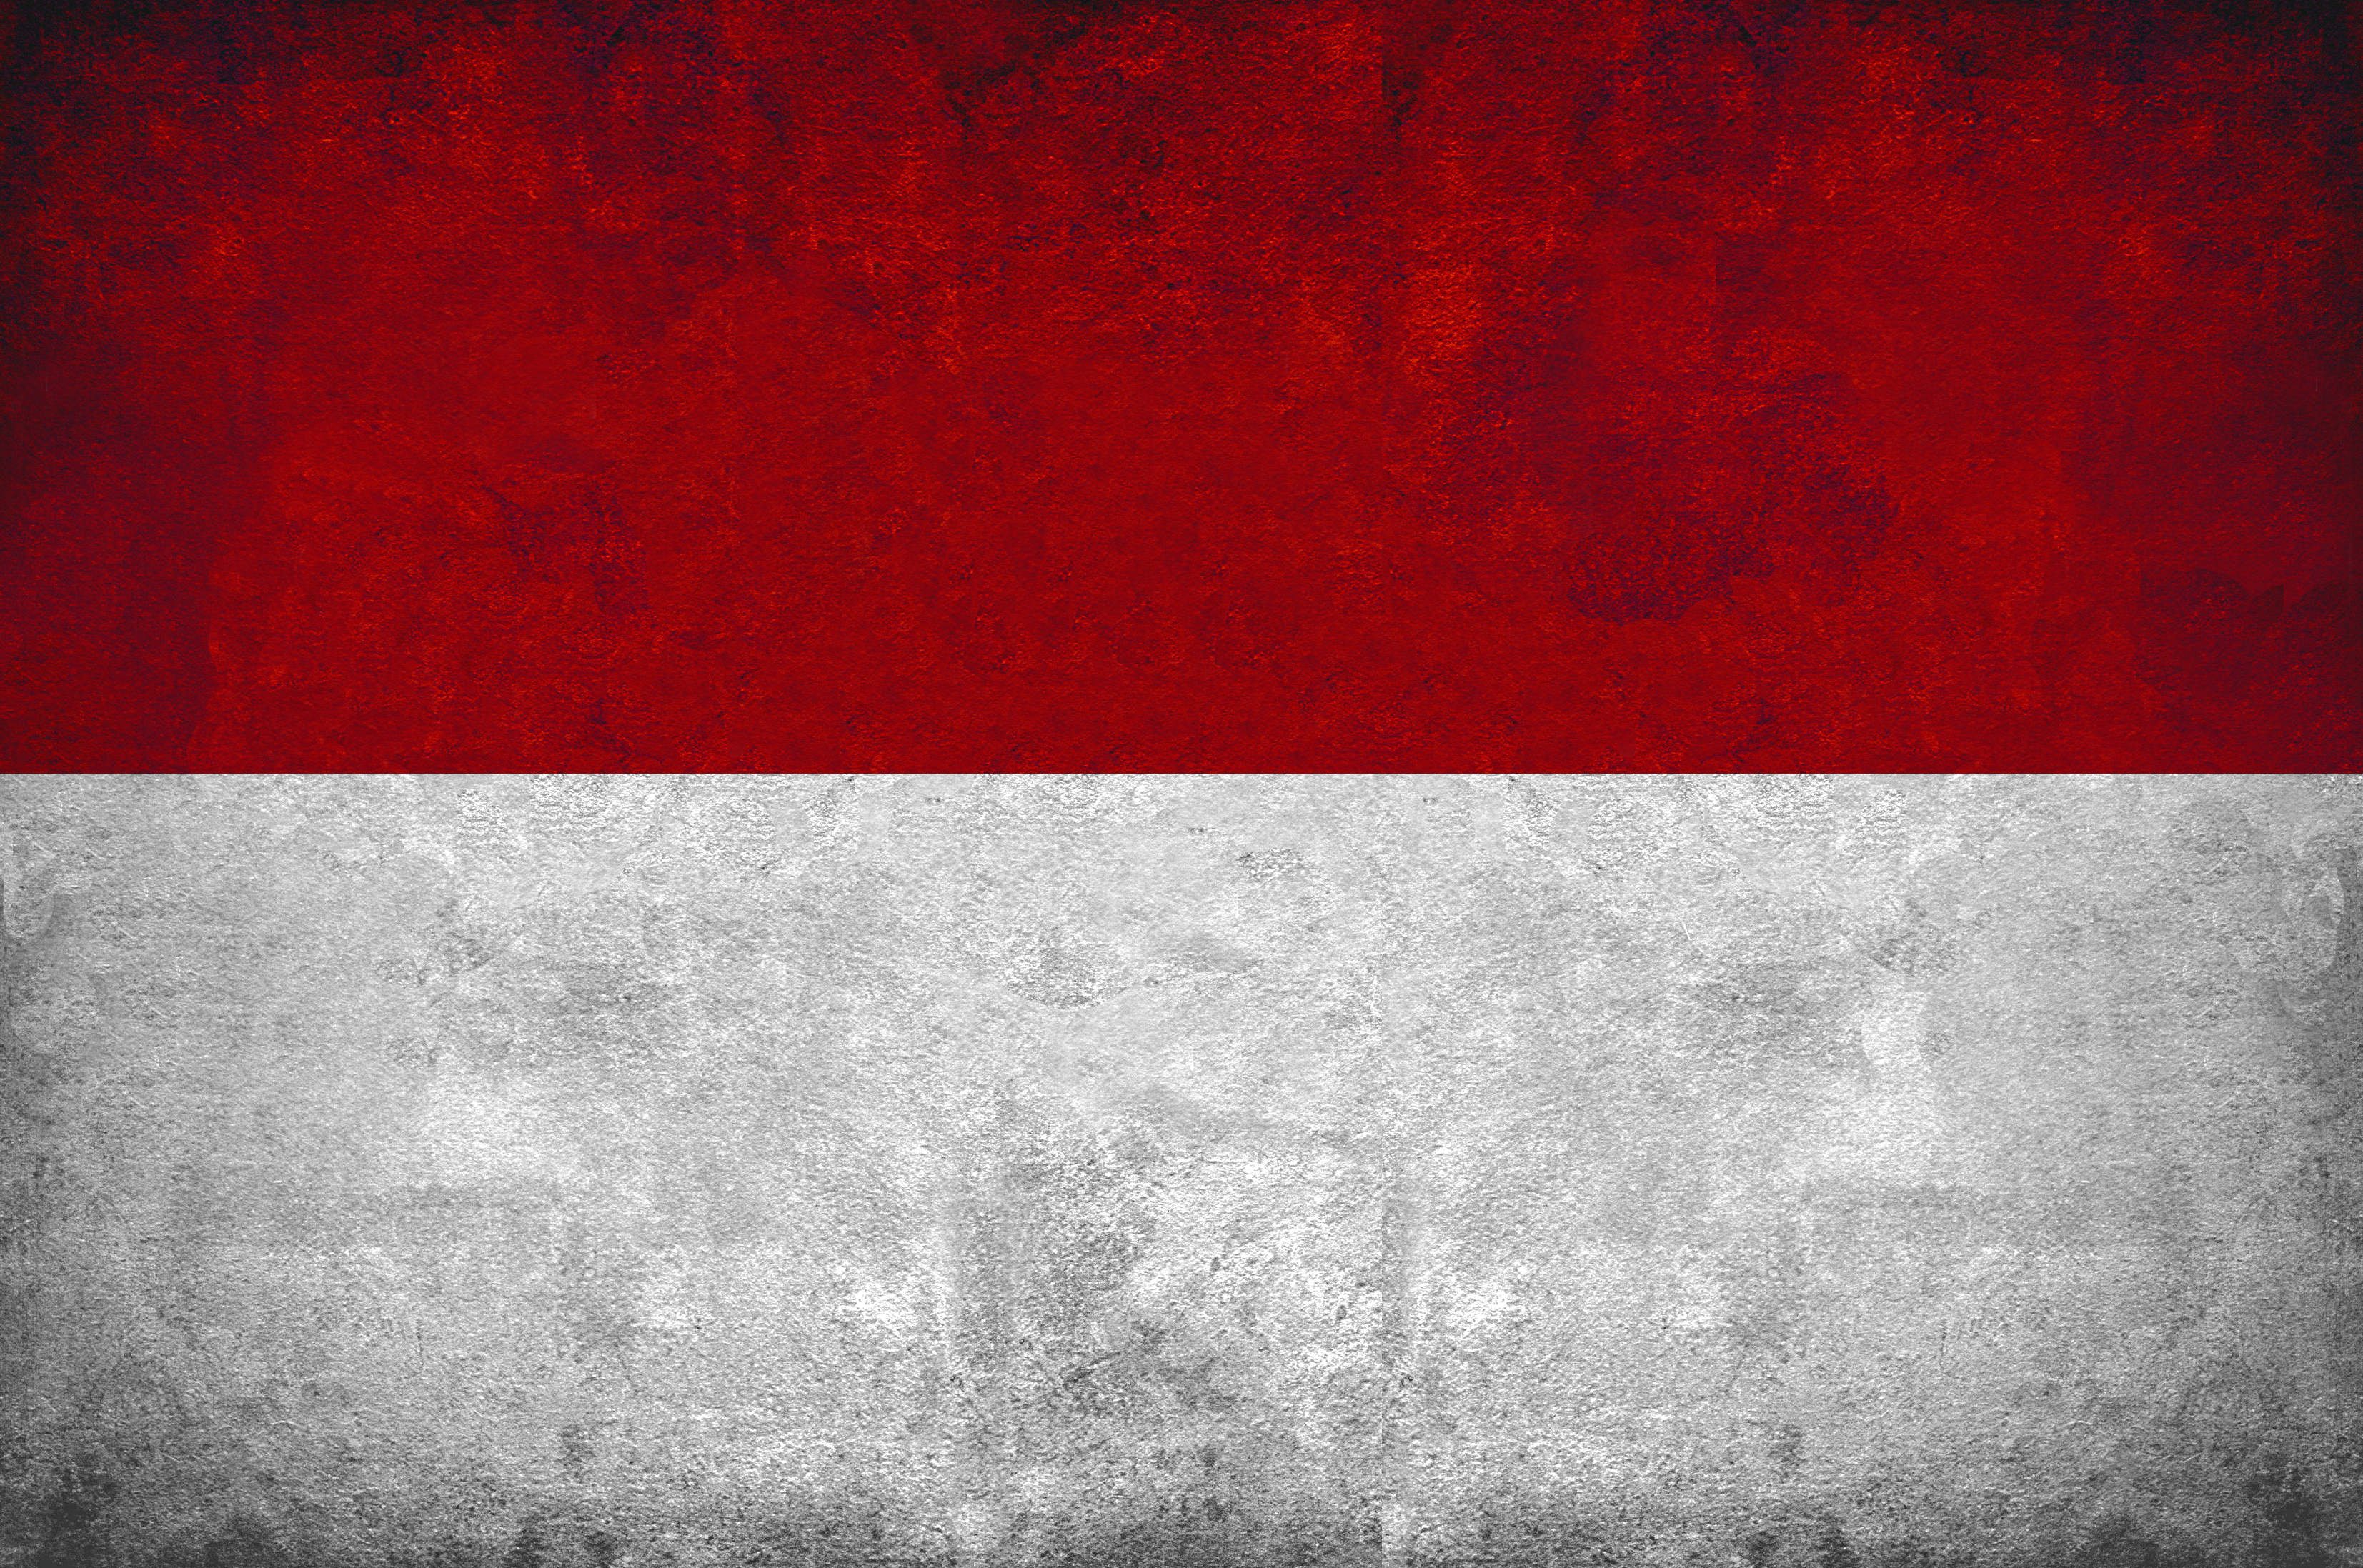 Free Download Indonesian Flag Indonesia Flags Wallpaper 3307x2195 3307x2195 For Your Desktop Mobile Tablet Explore 35 Indonesia Flag Wallpapers Indonesia Flag Wallpapers Wallpaper Peta Indonesia Flag Background Wallpaper